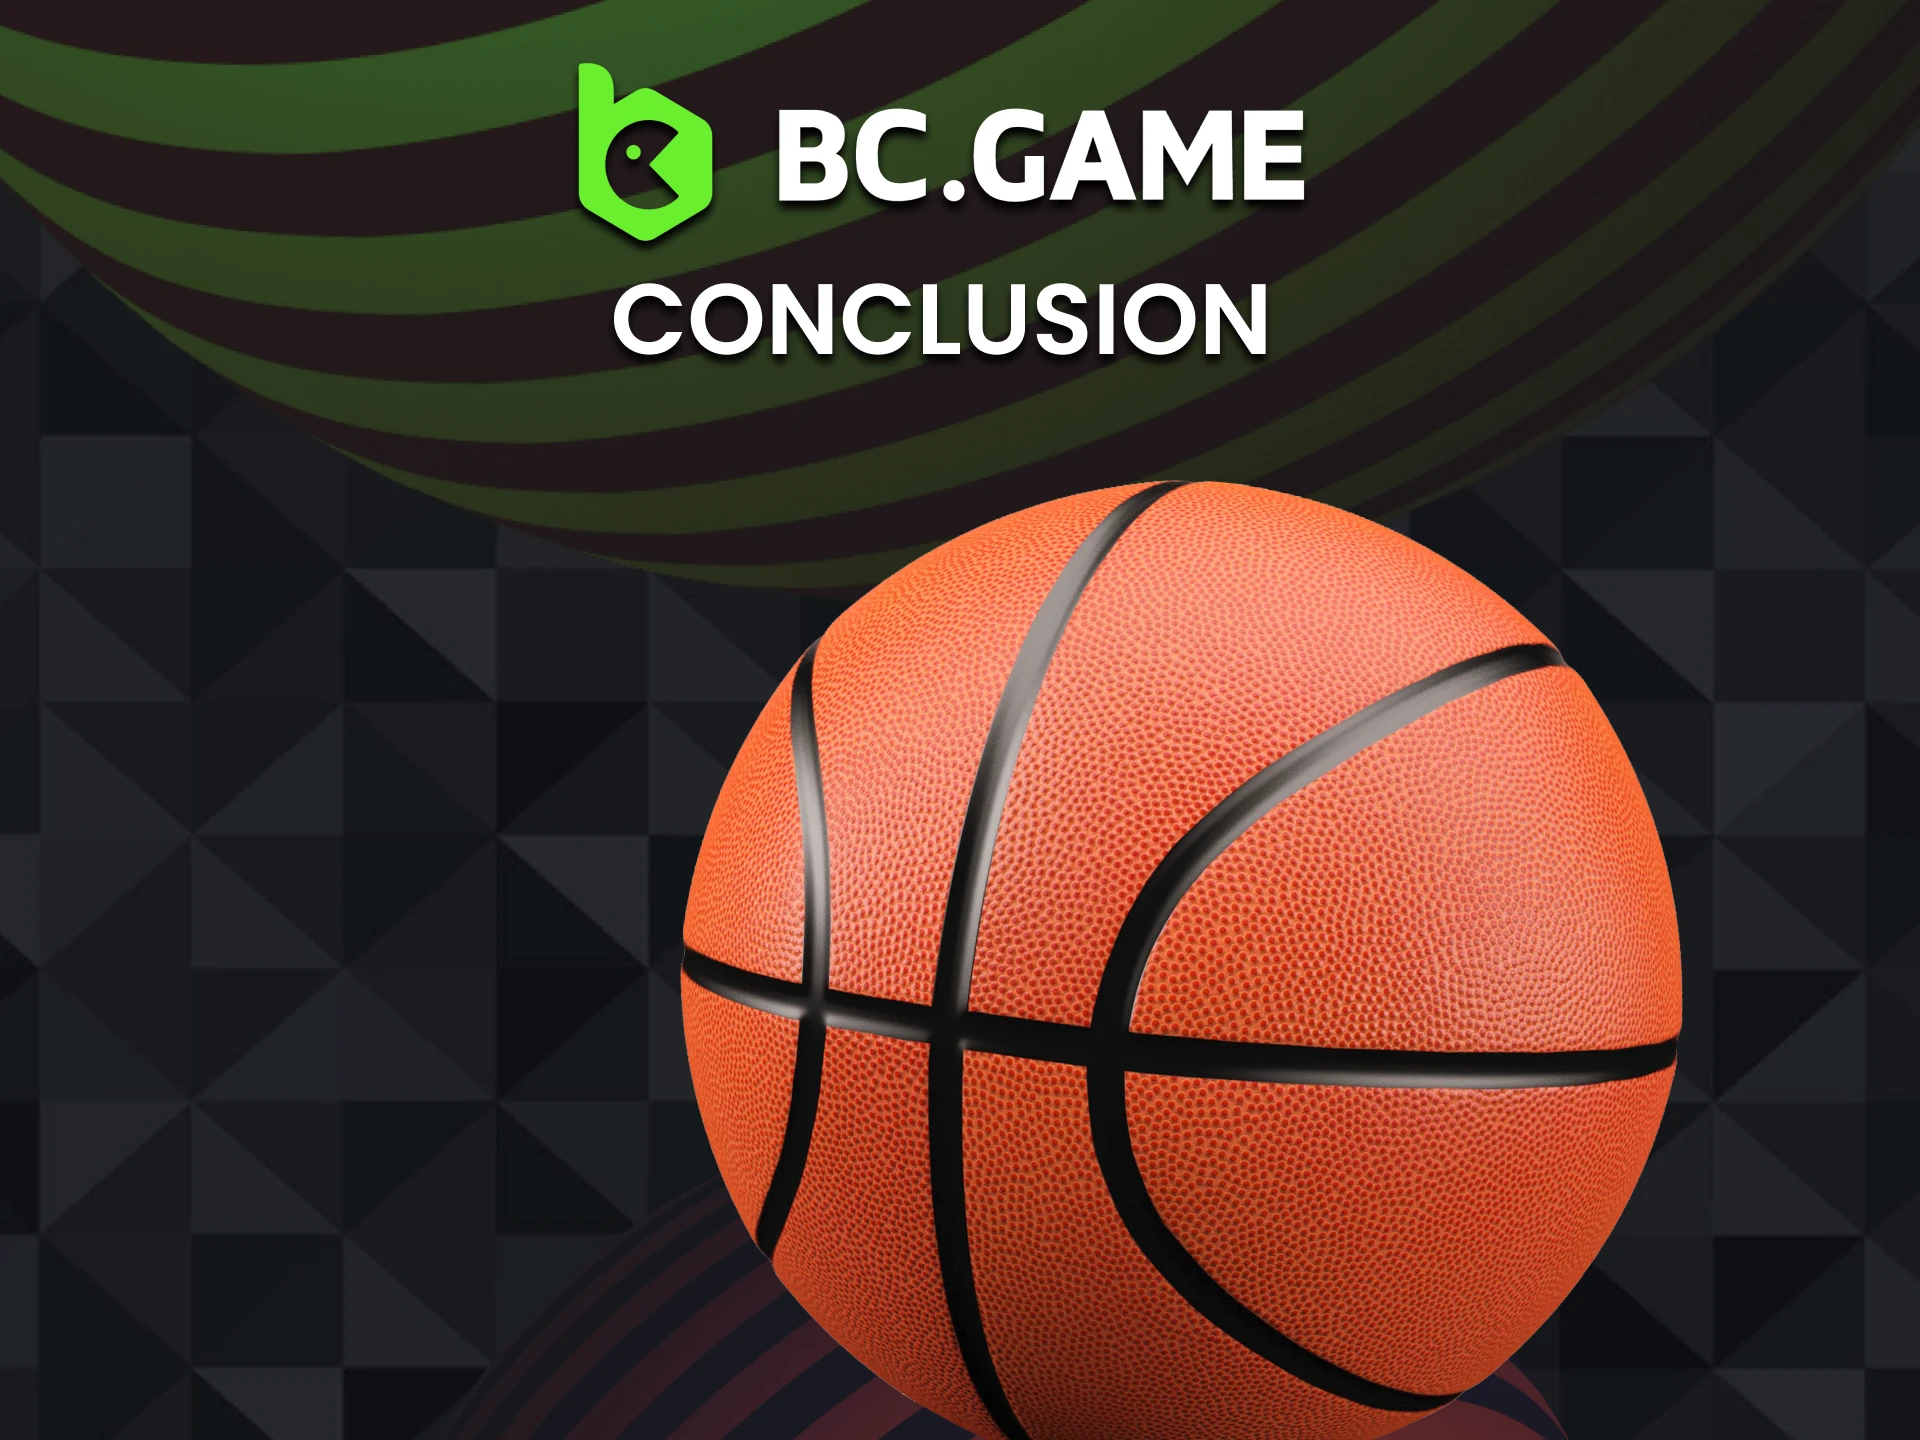 BC Game is the right choice for basketball betting.